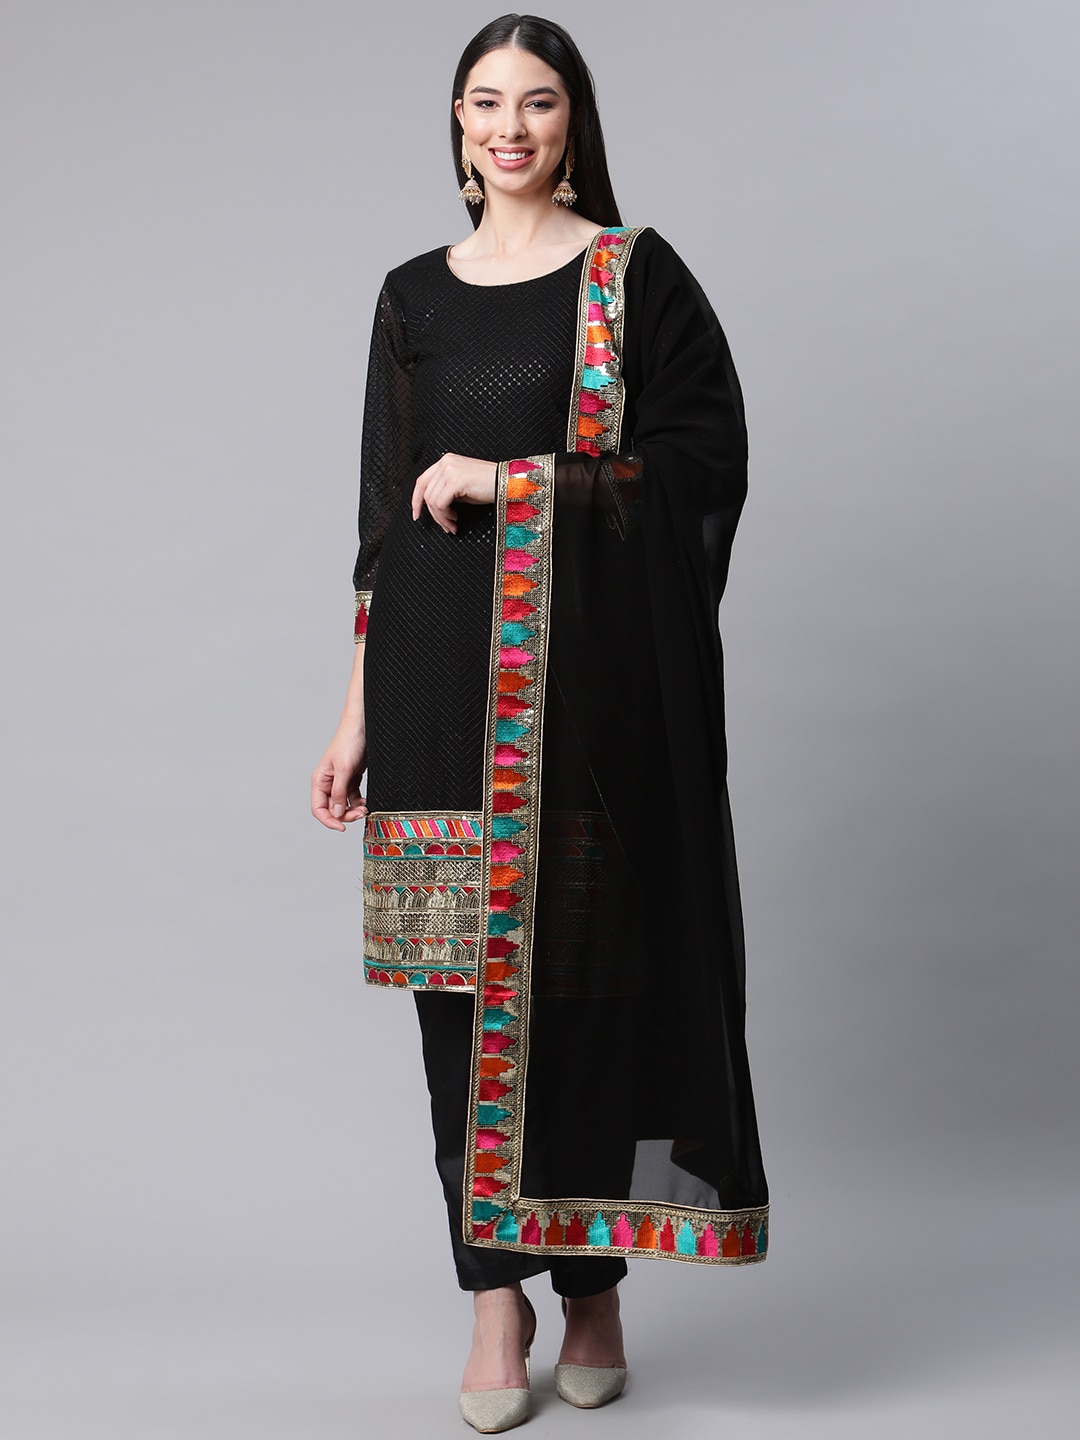 Readiprint Fashions Black Embroidered Semi-Stitched Dress Material